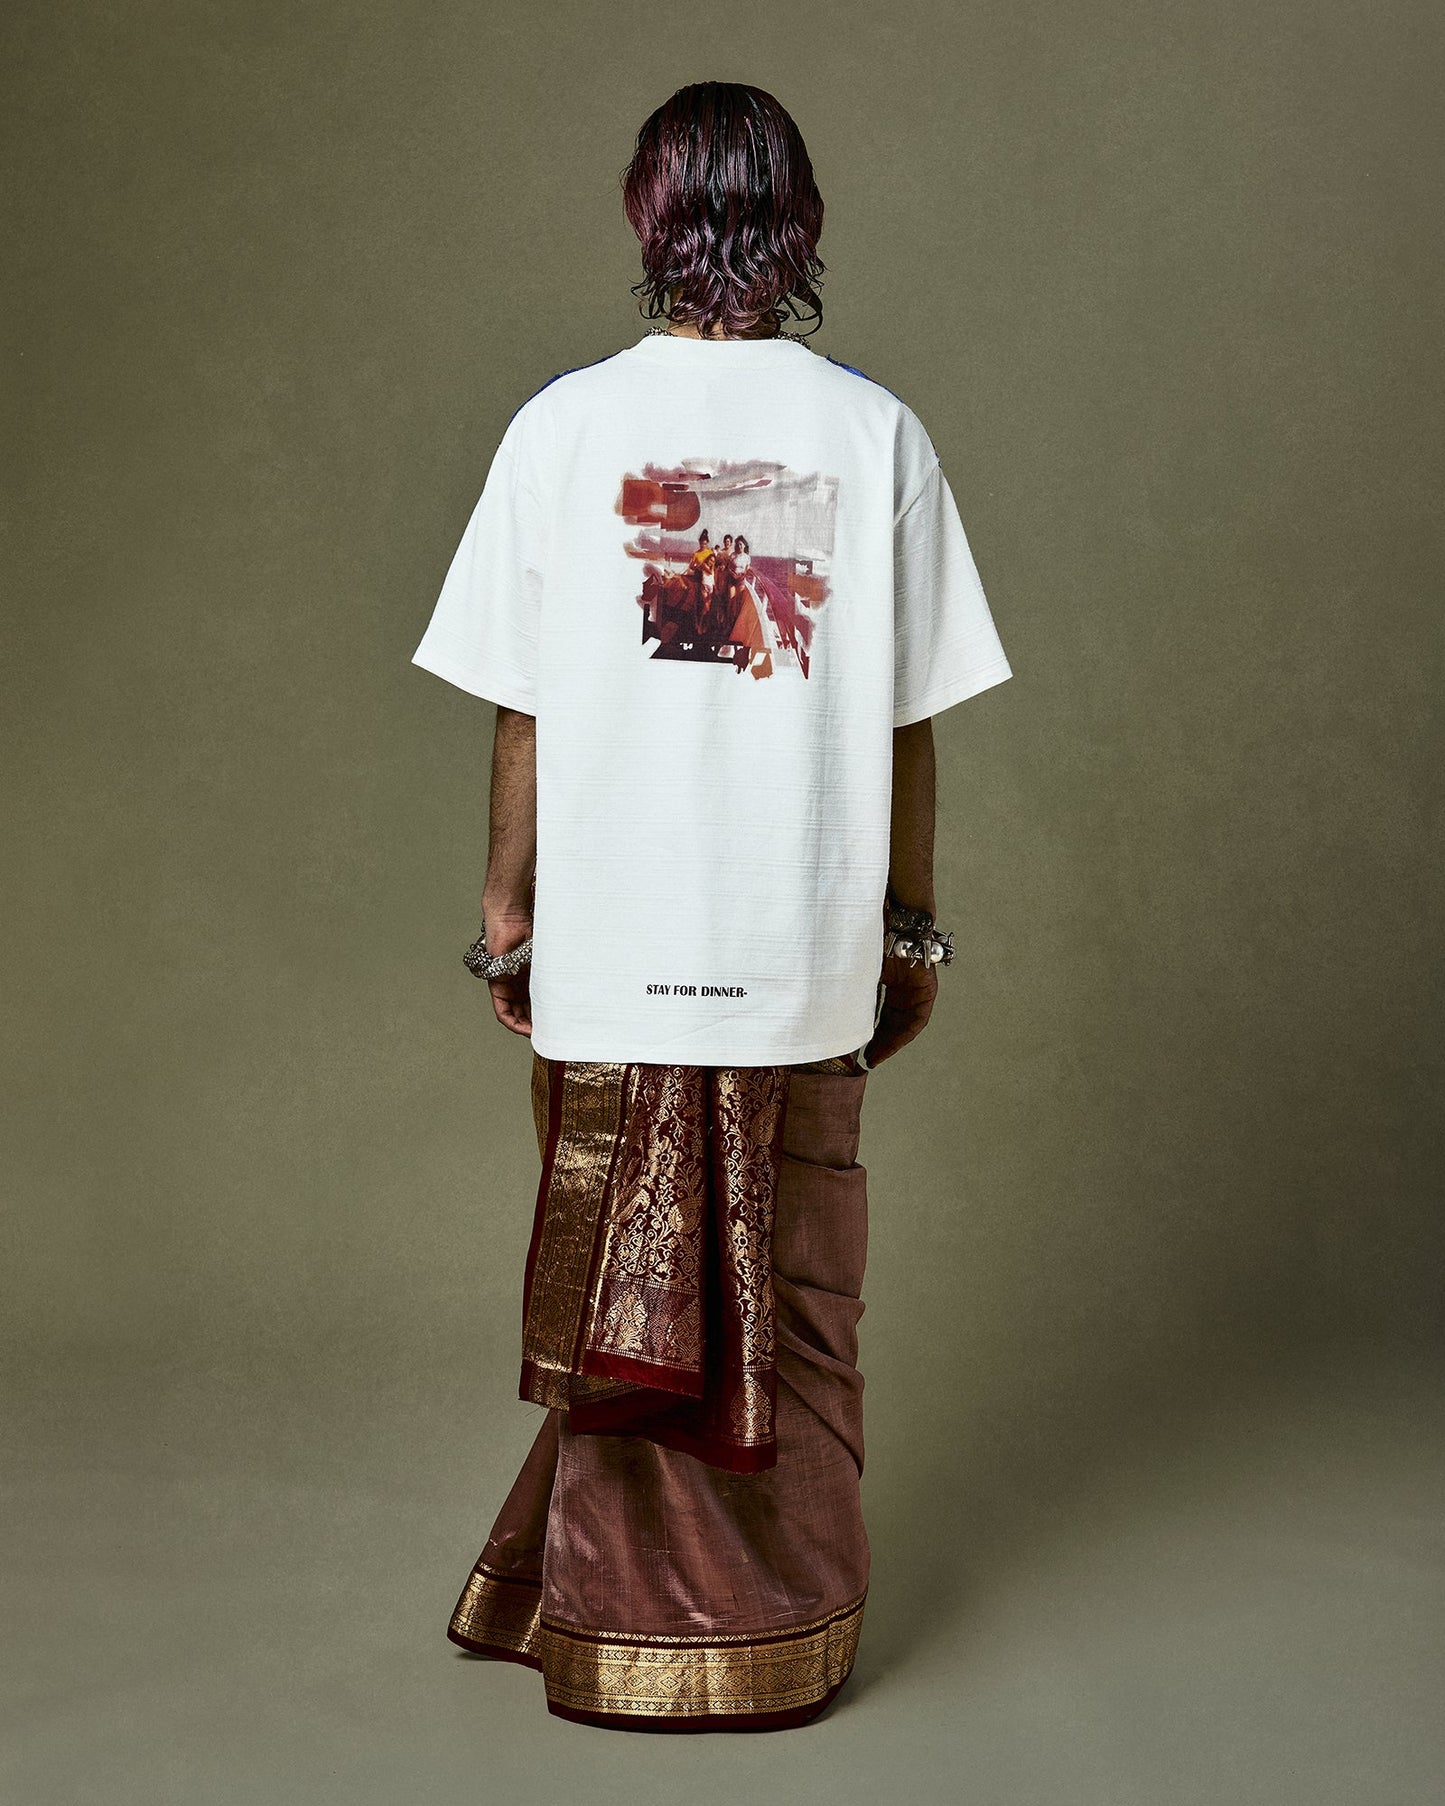 Quinto T-Shirt with an oversized silhouette, illustrating traditional narratives and contemporary stories with a 'Calabria-Sicilia' theme - fabricated with organic Tamil Nadu cotton and up-cycled Mumbai saree trimmings.